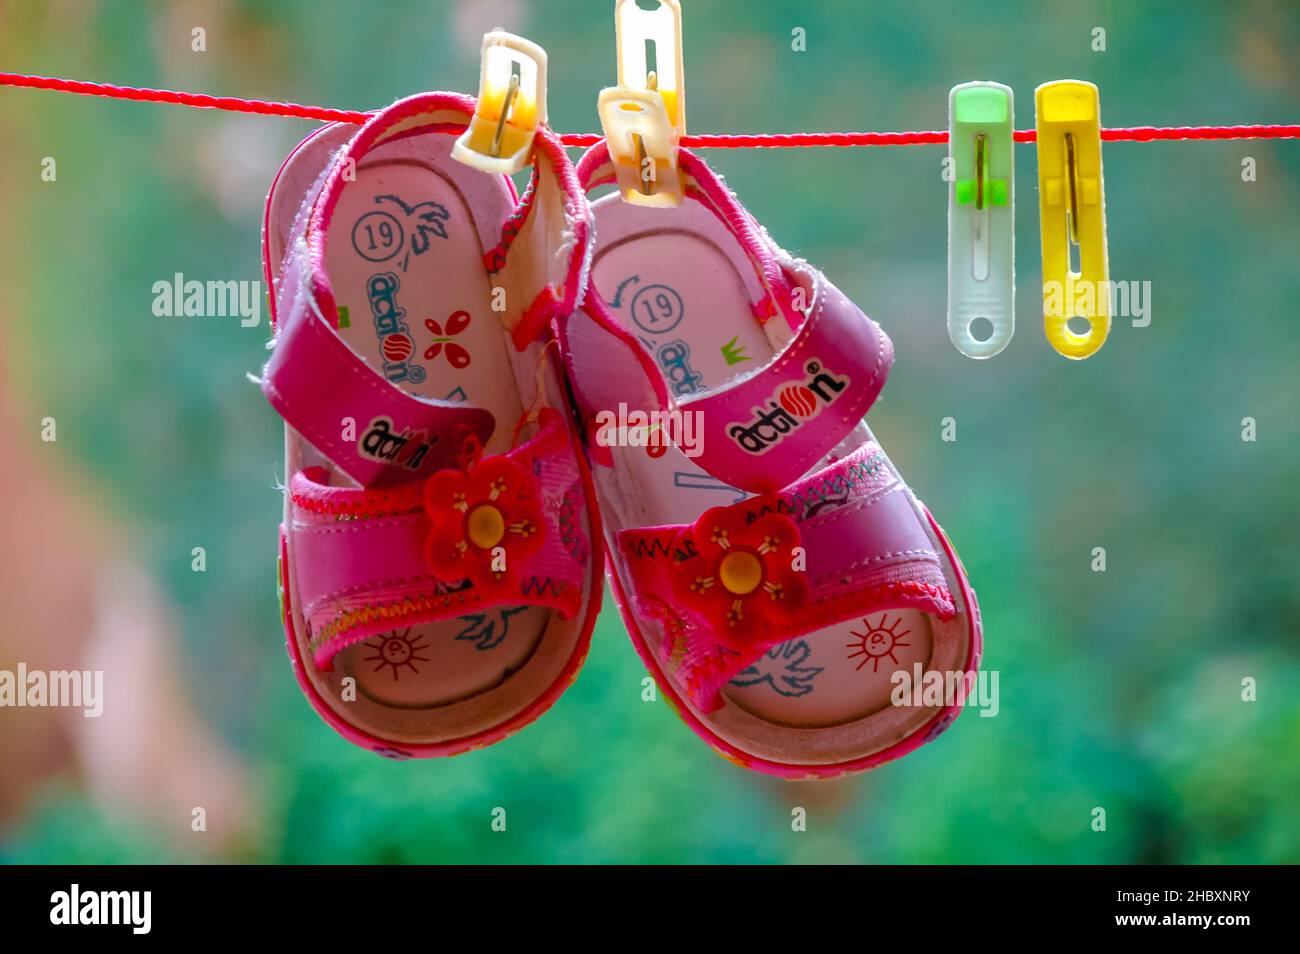 A pair of decorative pink baby sandals / shoes, washed and hanged up on a clothes line for drying, using plastic clothespins or clothes pegs. Stock Photo